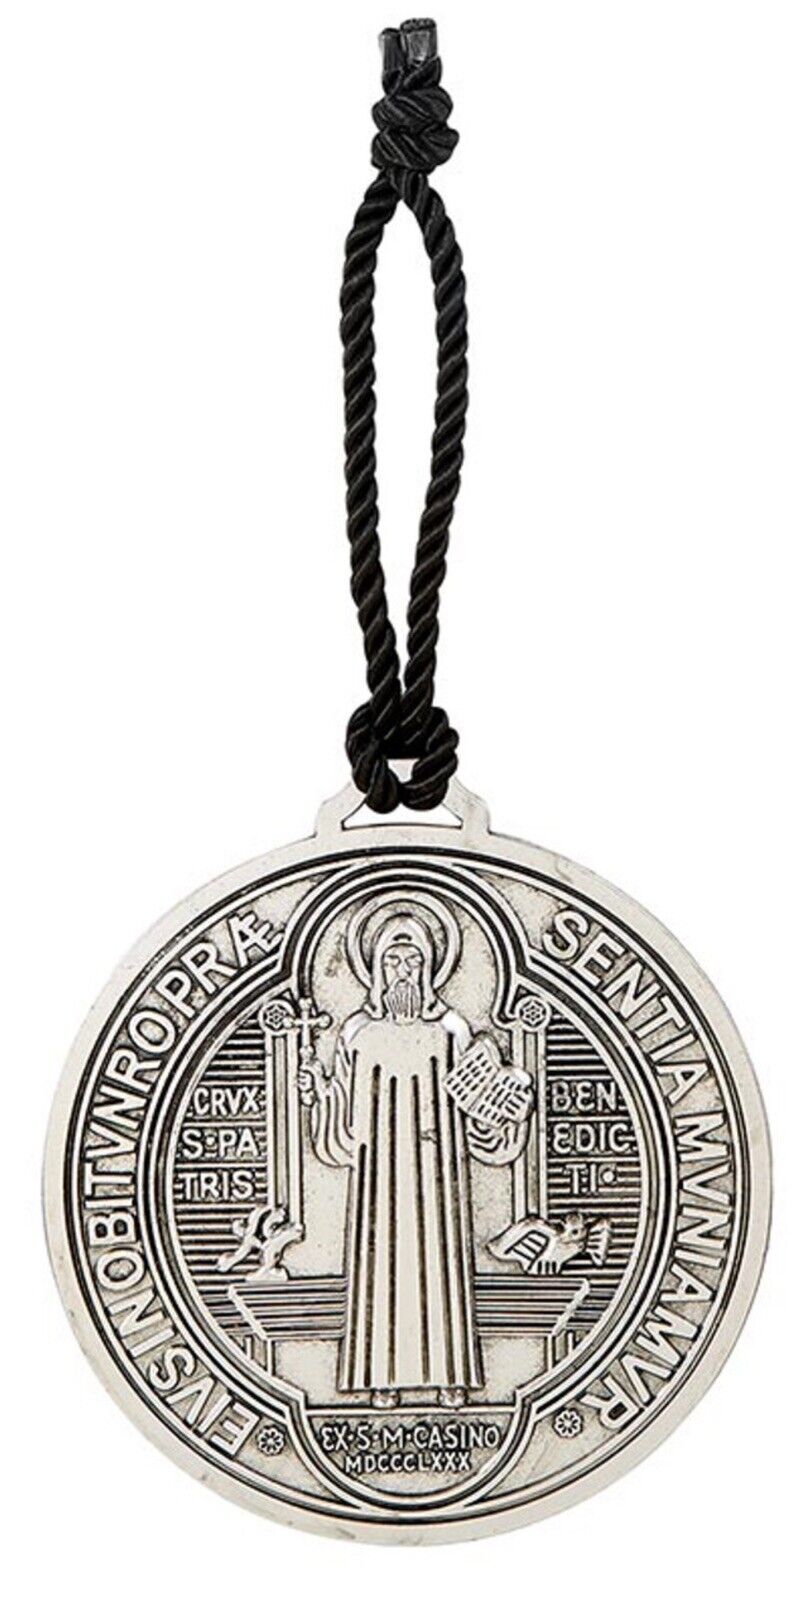 5” Extra Large St. Saint Benedict Cross Medal Home Protection Safety Door Hanger